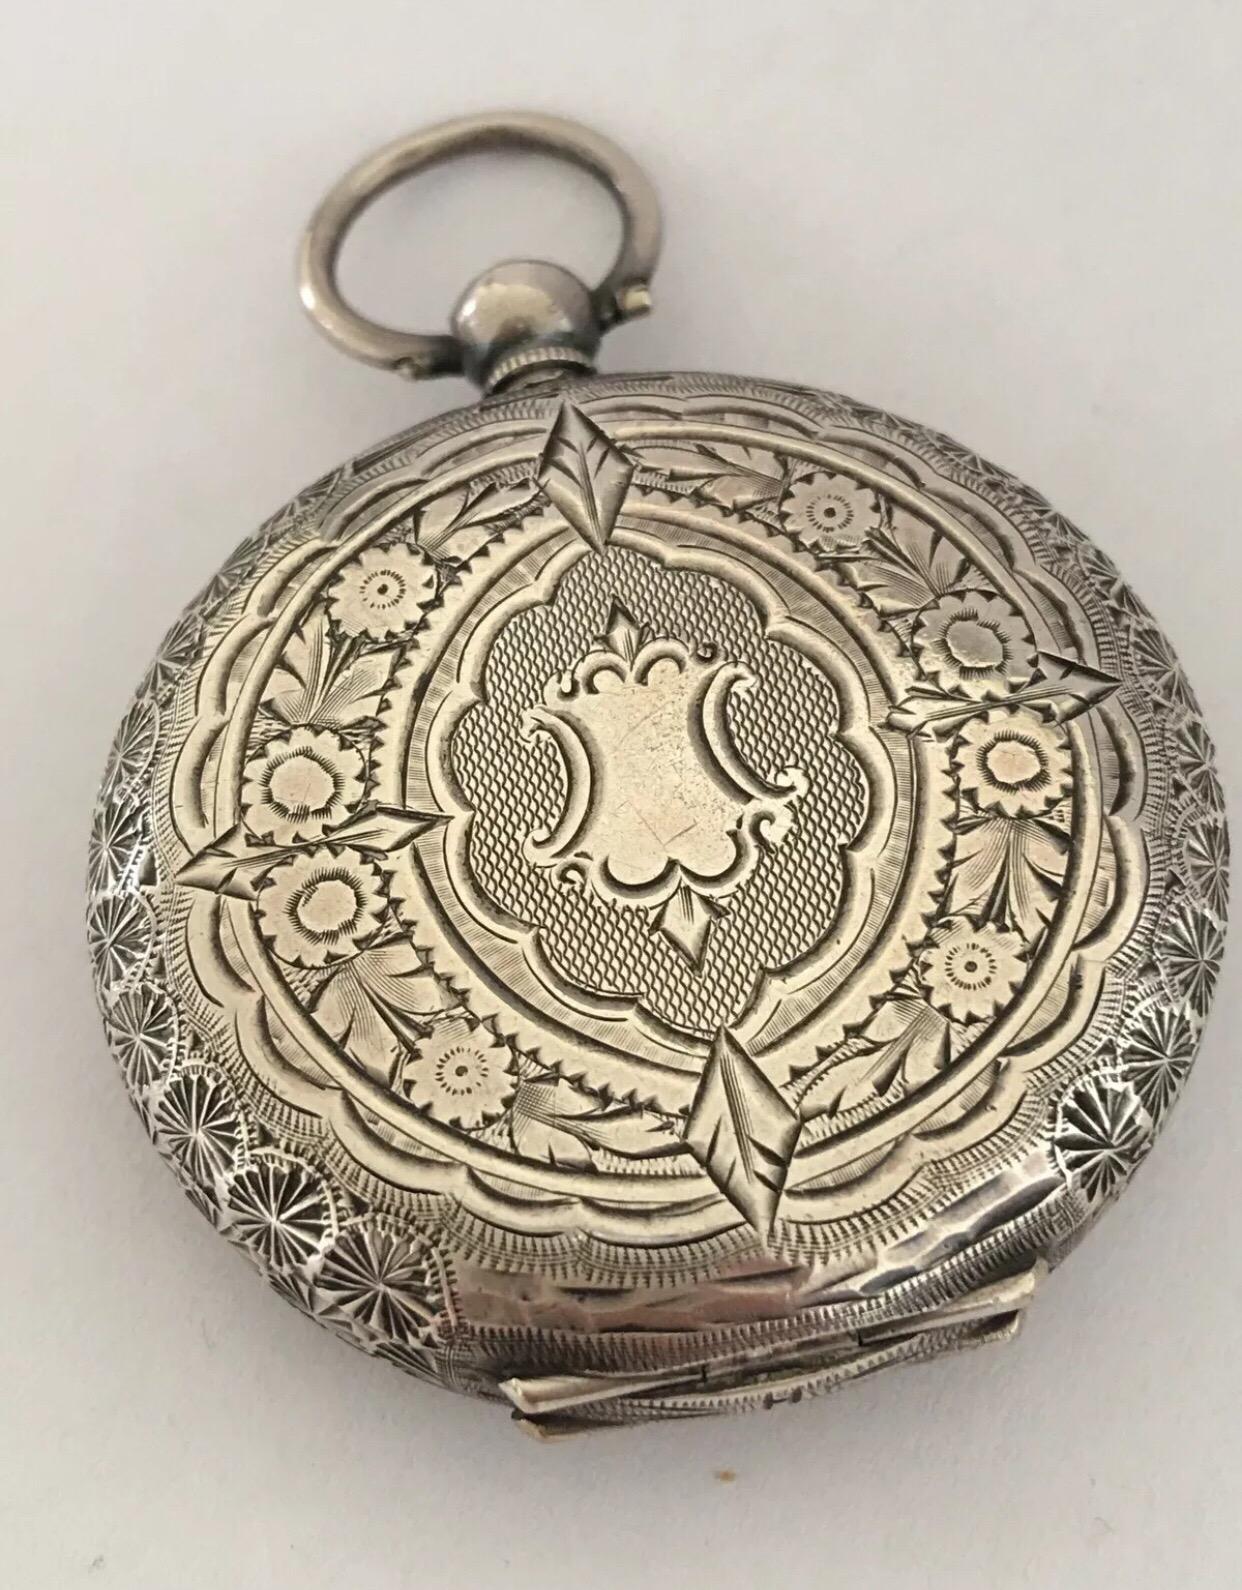 
Antique Silver with pink Enamel & gold Enlaid Dial Pocket Watch.


This beautiful key-wind pocket watch is in good working condition and is ticking well. It comes with a key.